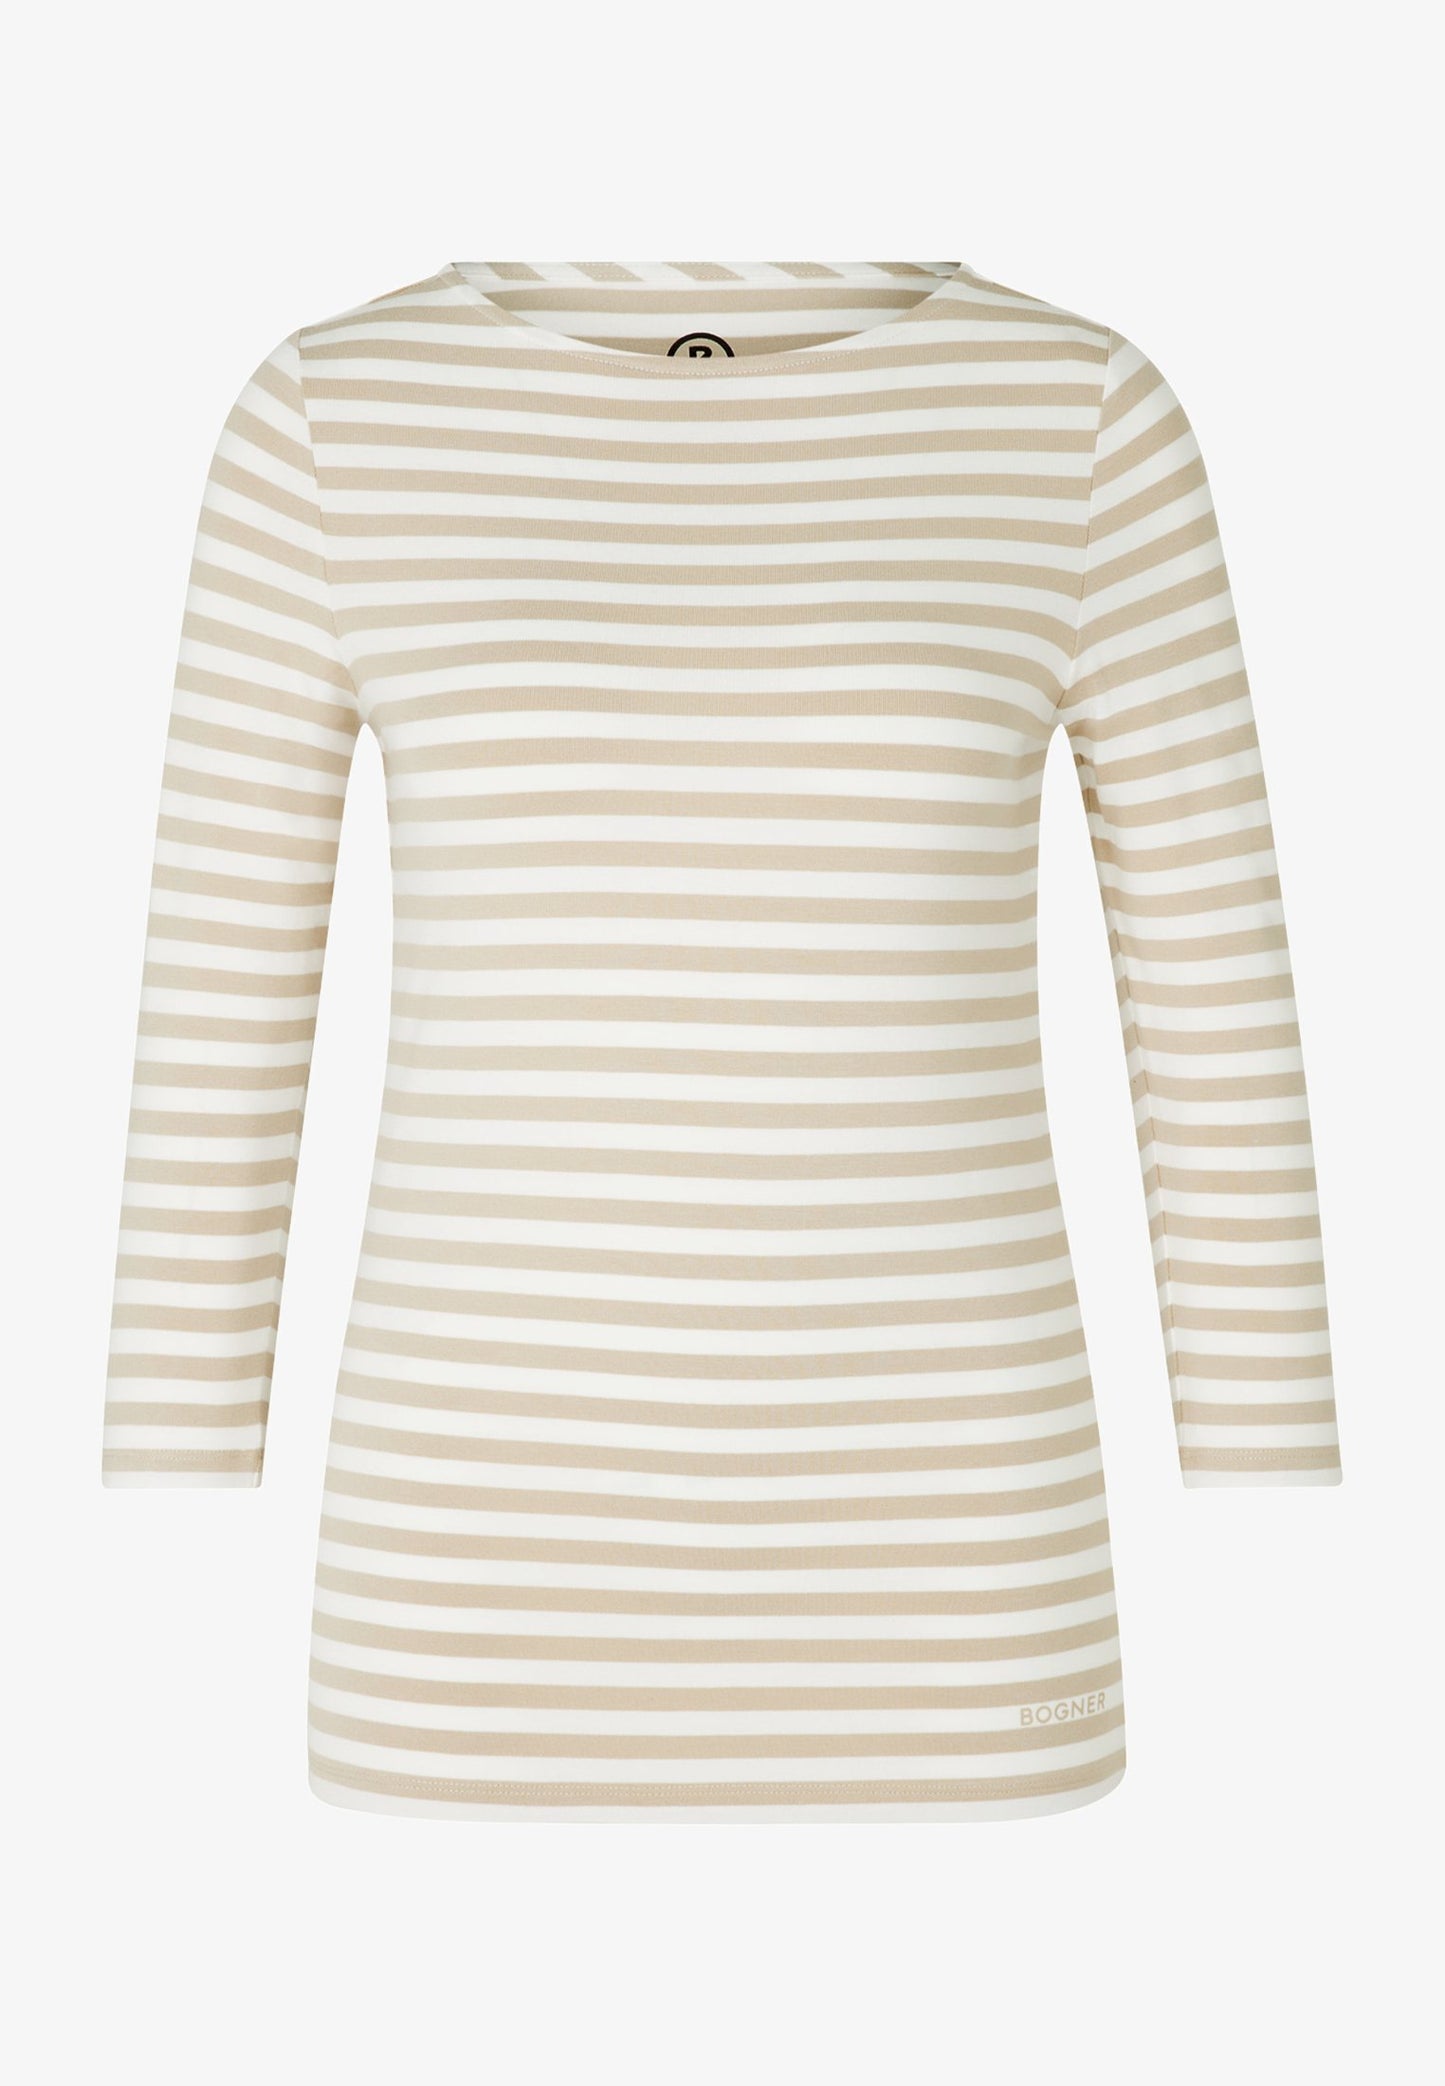 Boat Neck Striped Tee